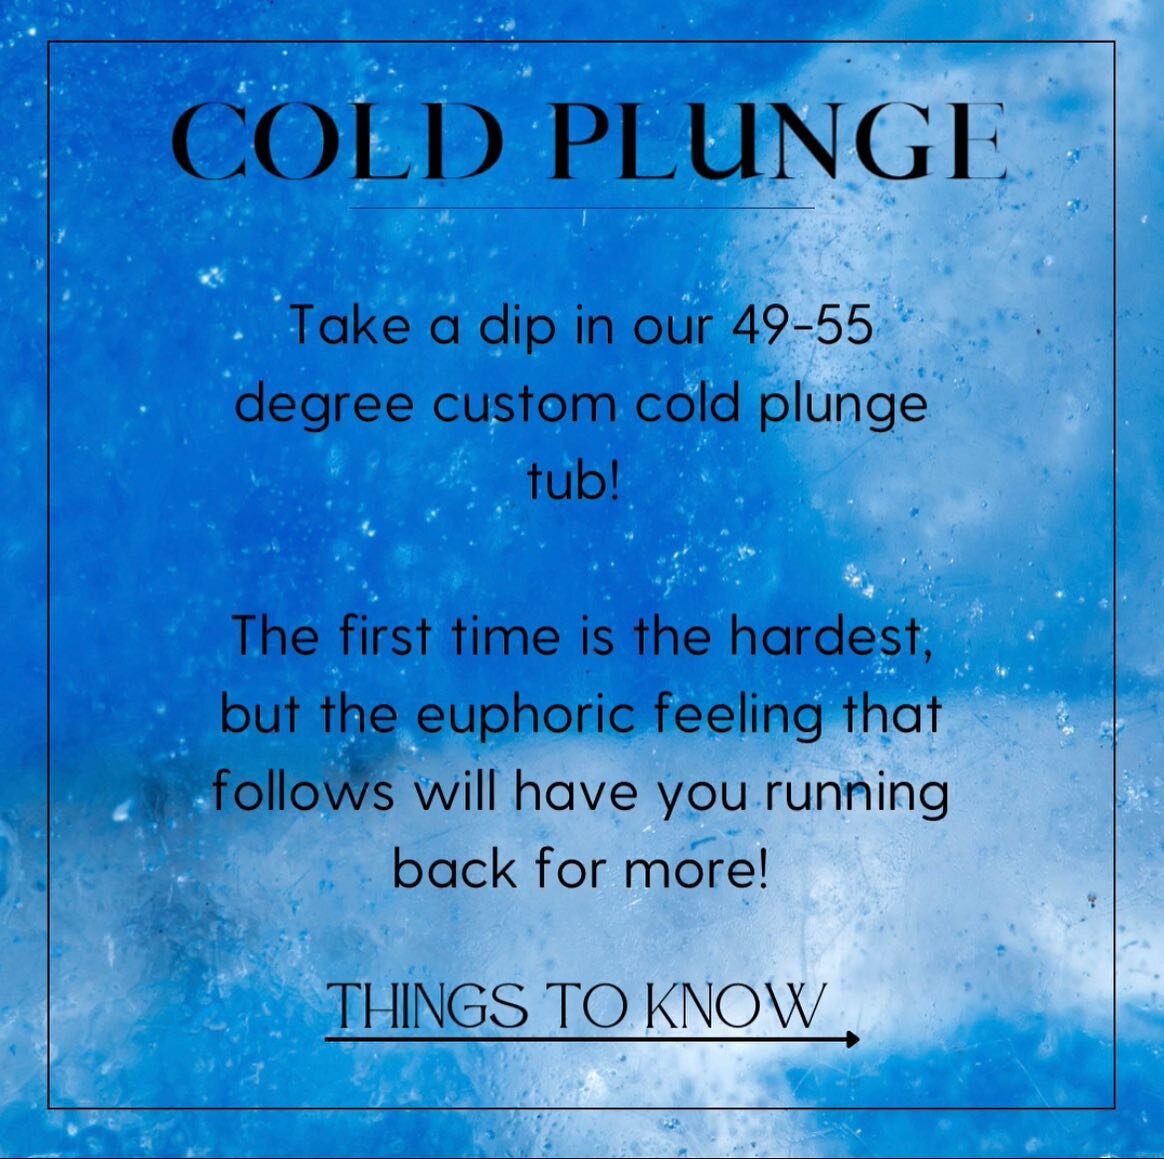 Cold plunge Tips, FAQ, and answers! &mdash;&mdash;&mdash;&gt; swipe to learn more!